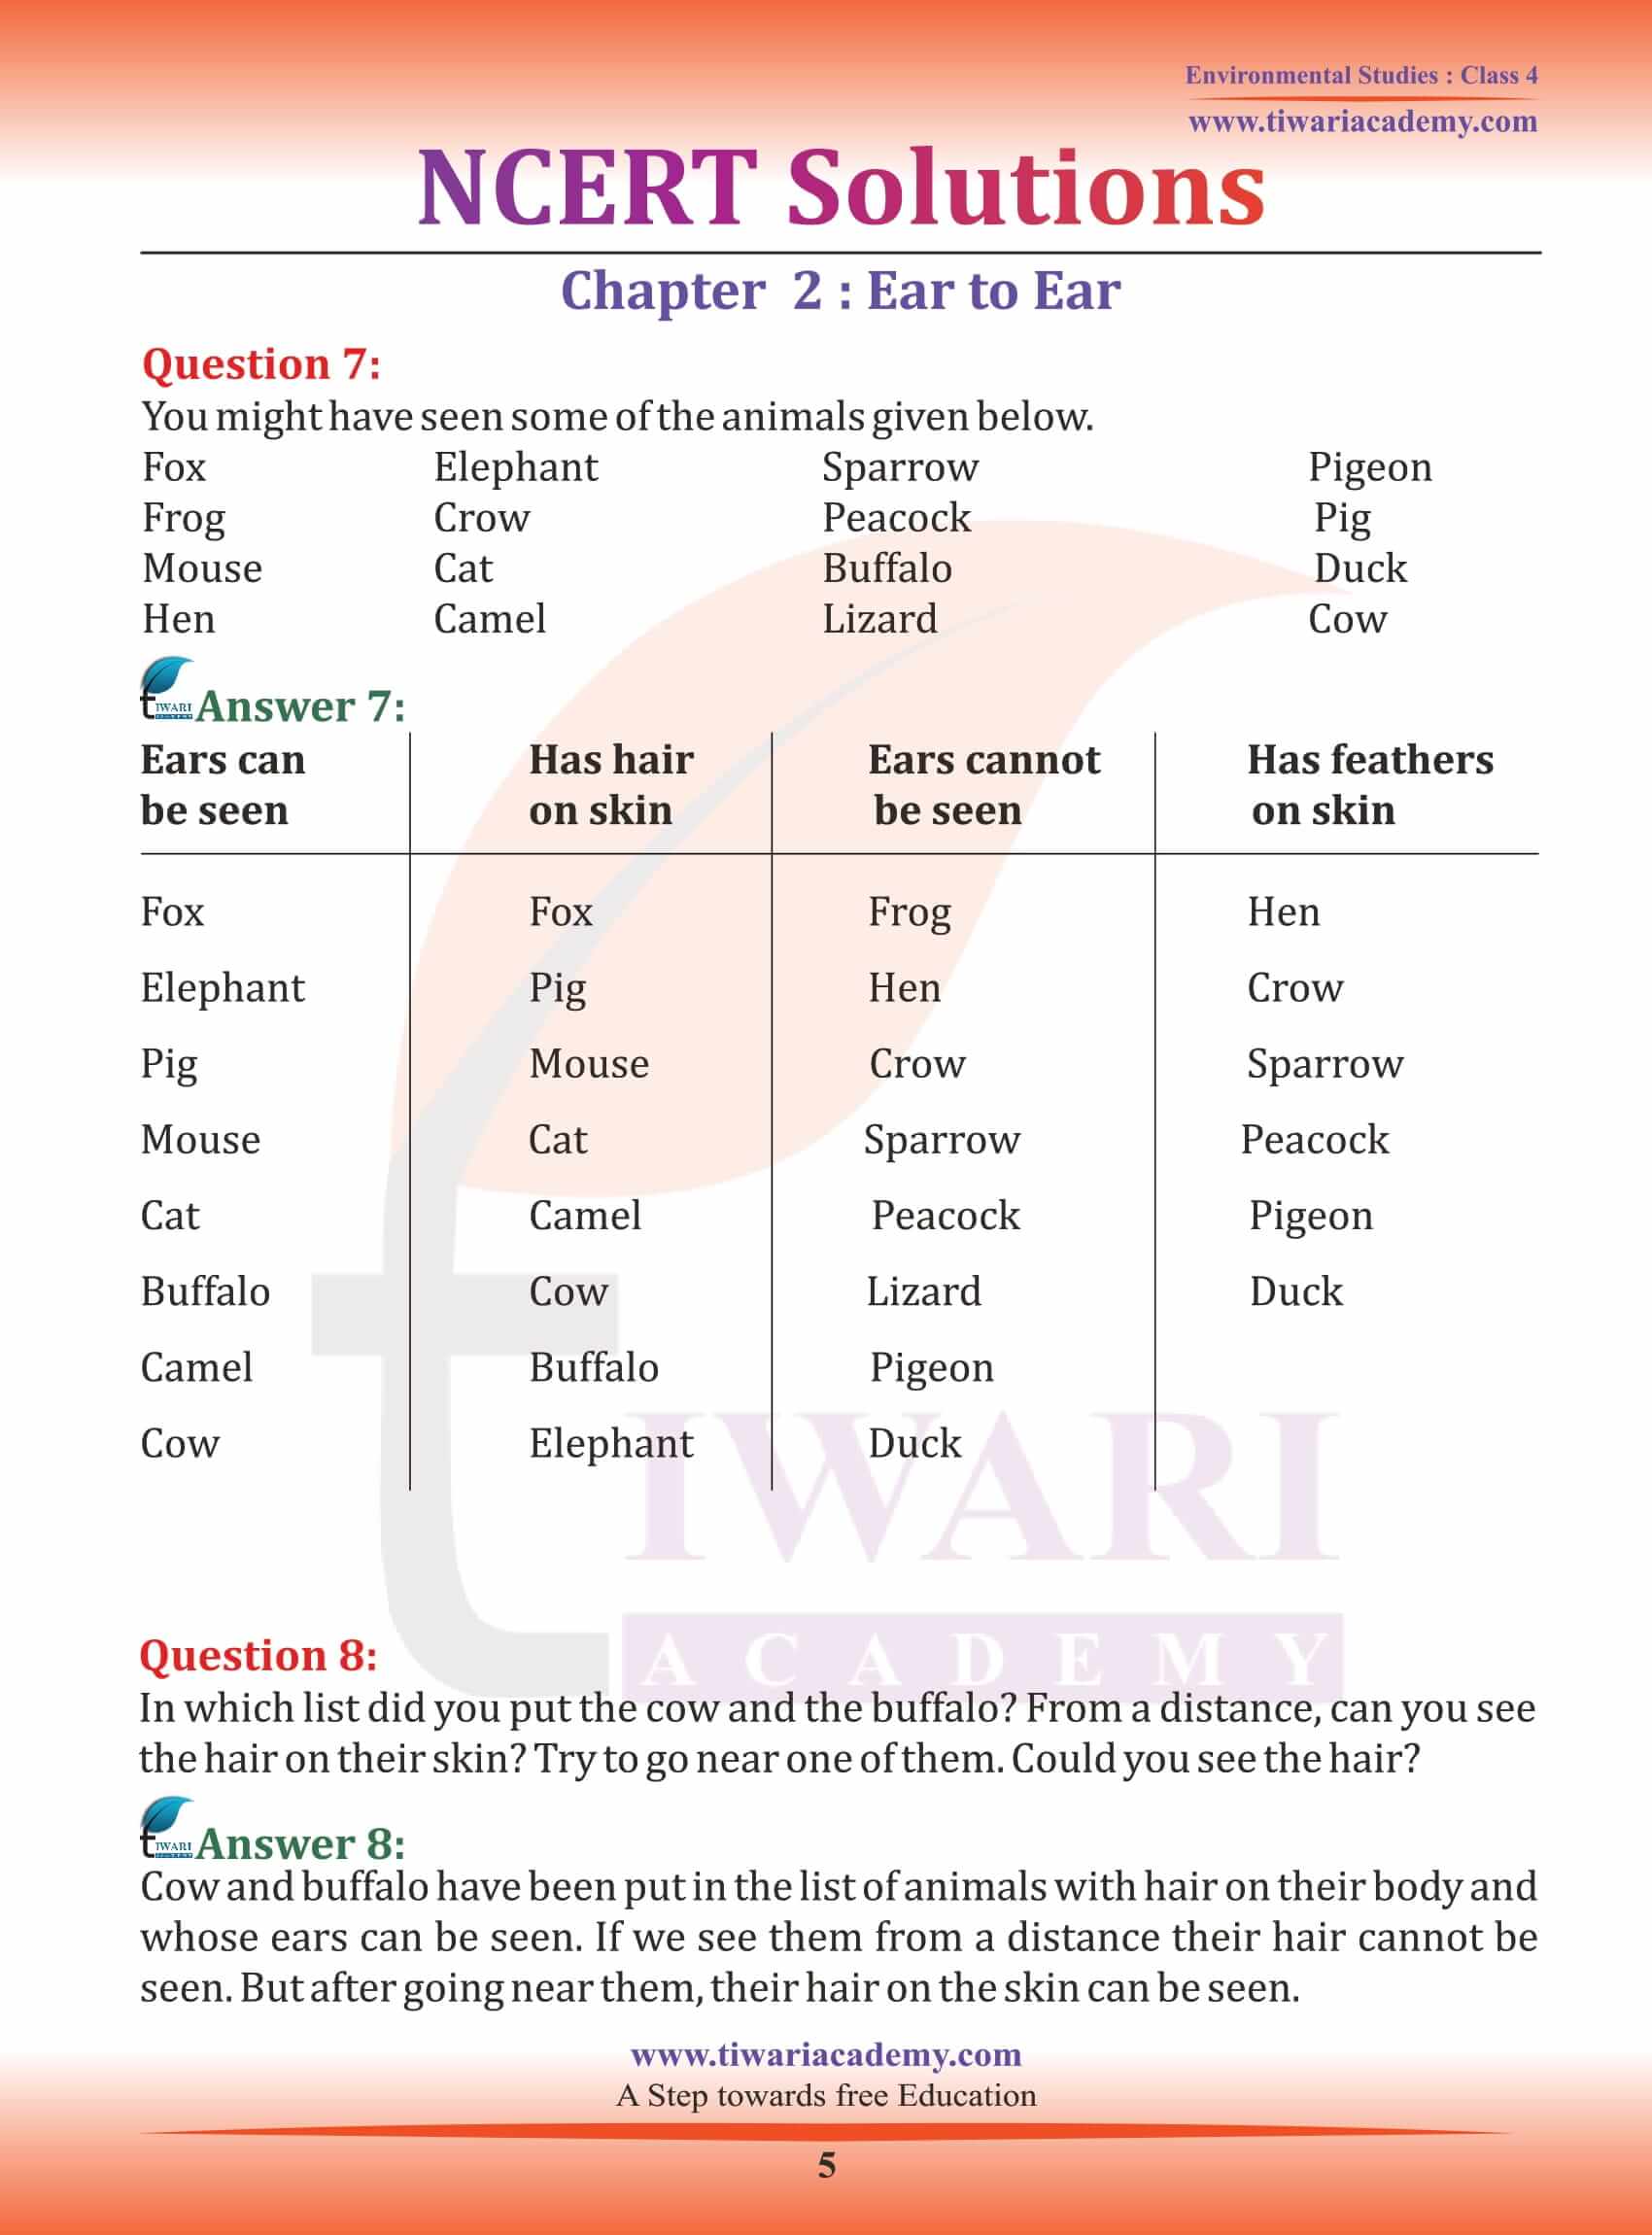 NCERT Solutions for Class 4 EVS Chapter 2 free to use